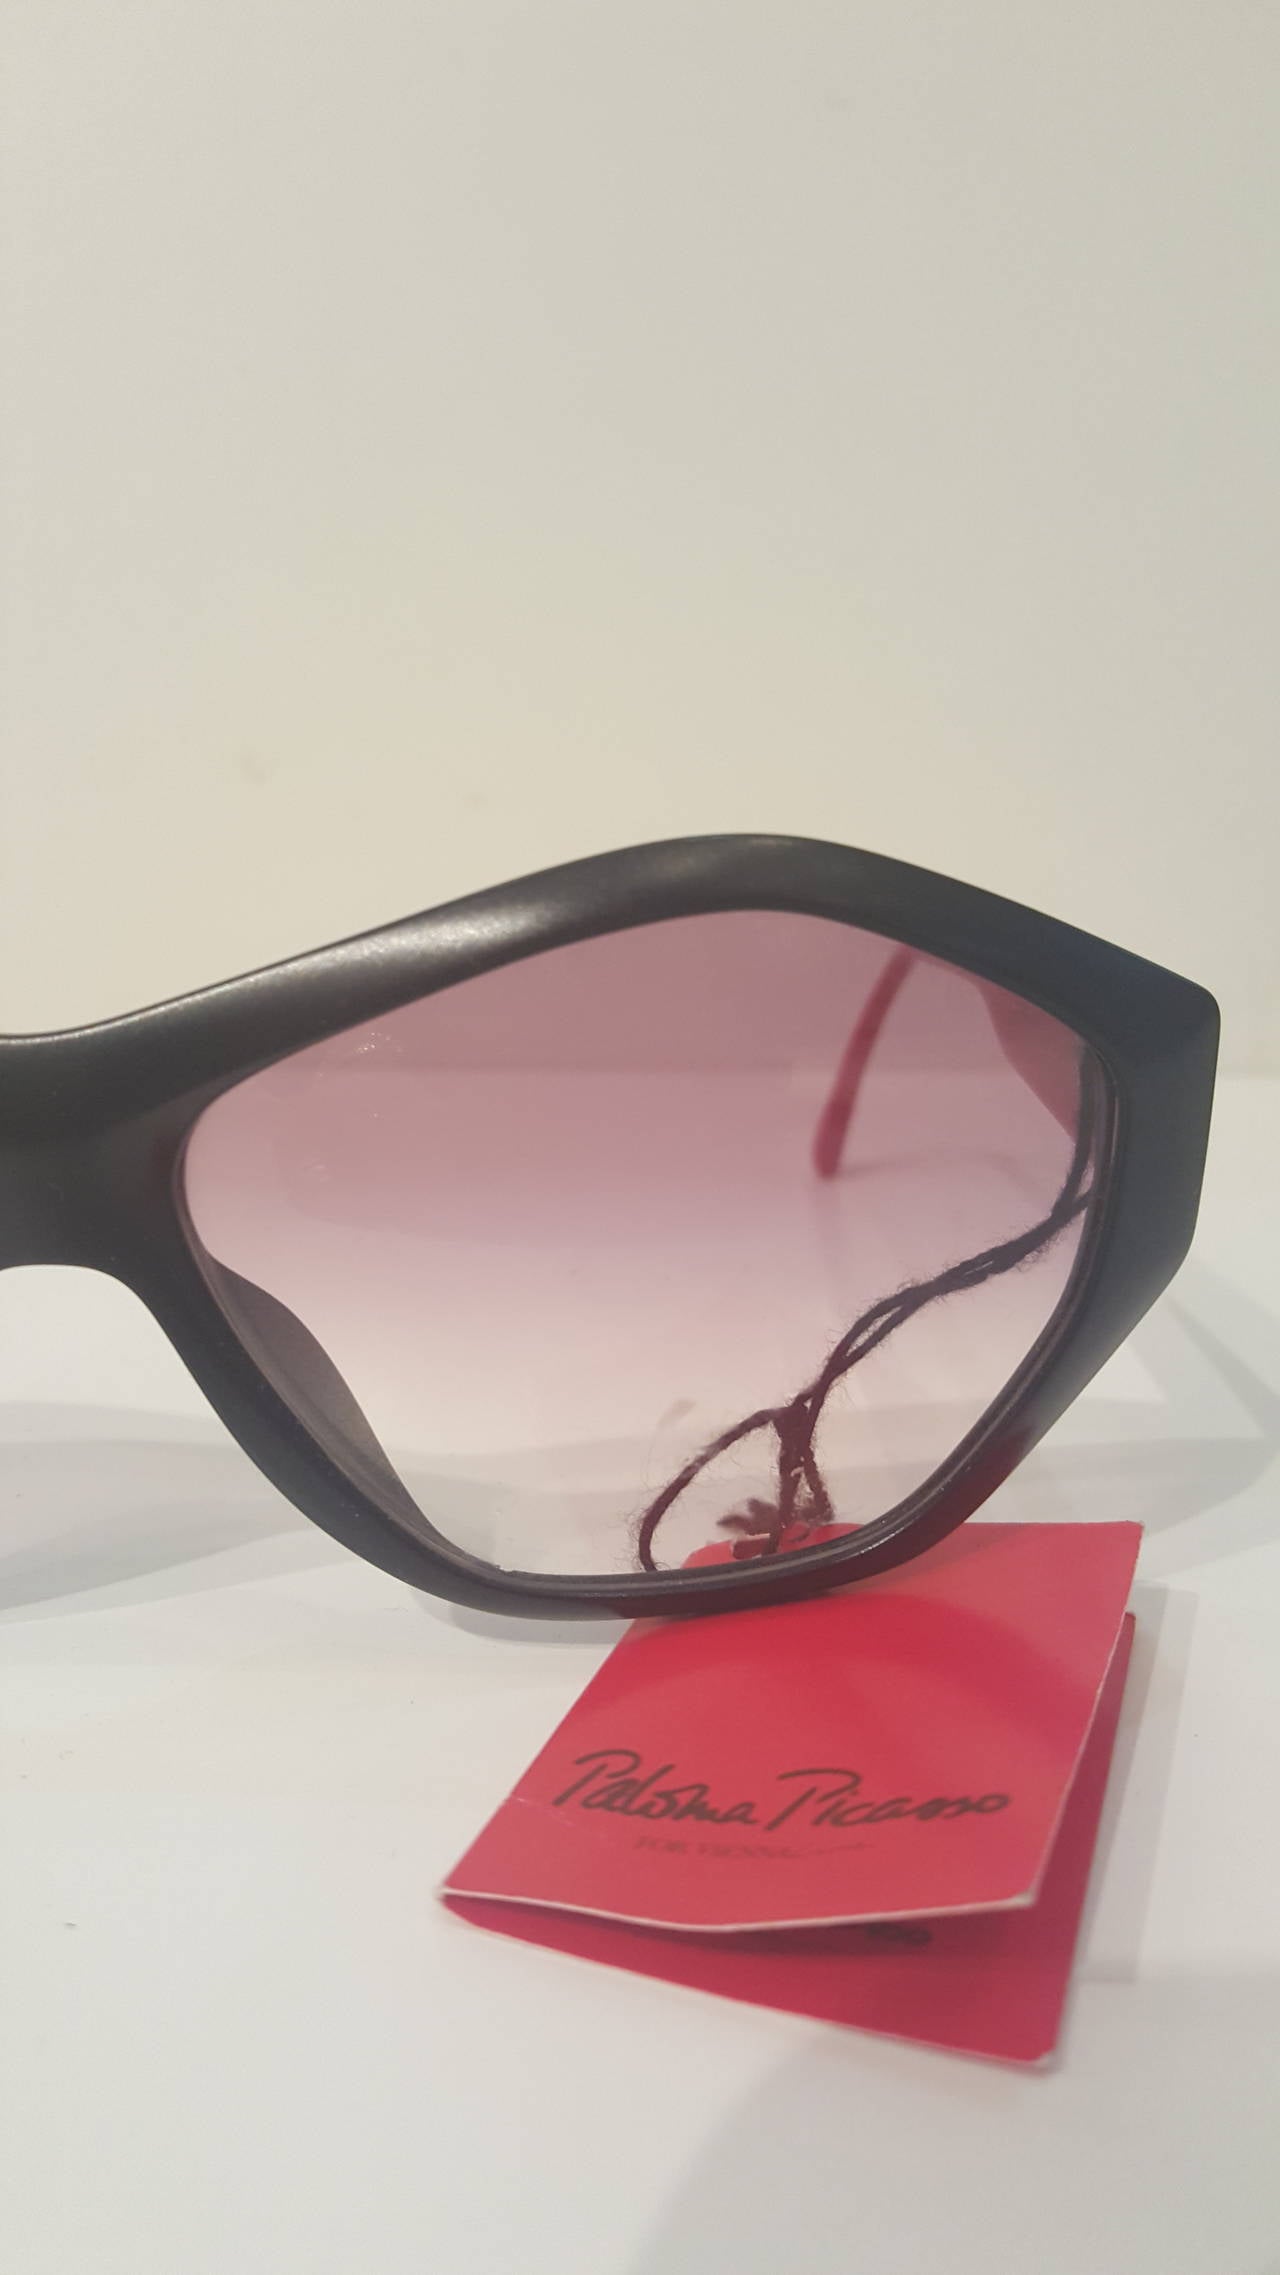 Women's 1980s Paloma Picasso black and red sunglasses